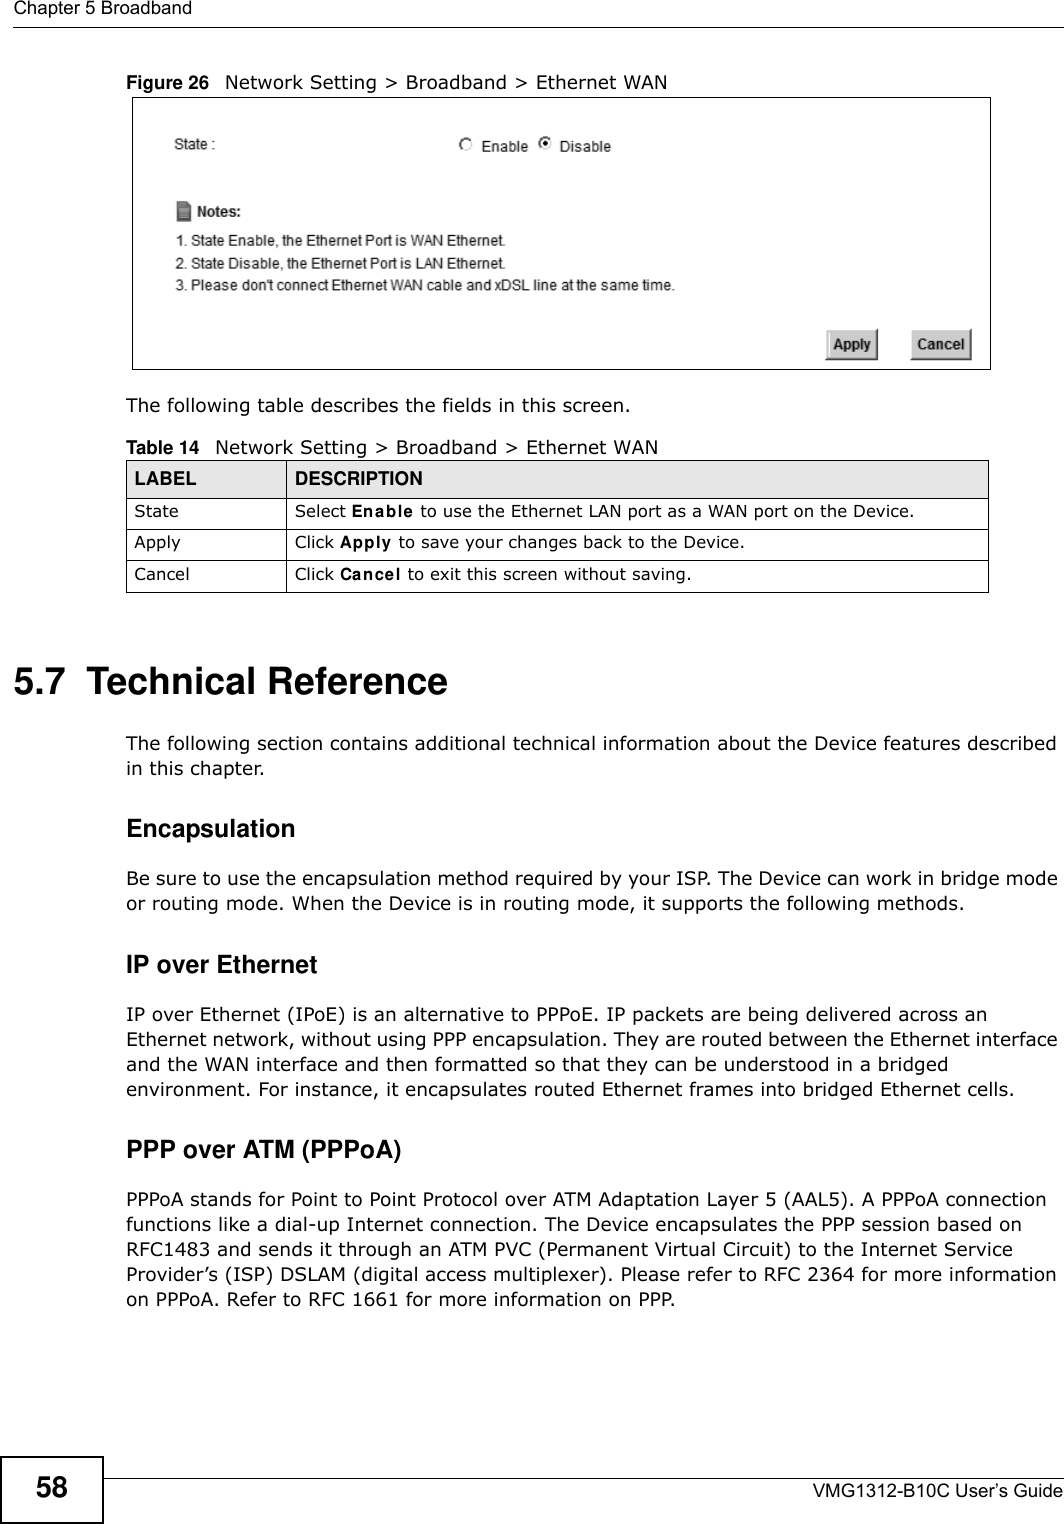 Chapter 5 BroadbandVMG1312-B10C User’s Guide58Figure 26   Network Setting &gt; Broadband &gt; Ethernet WAN  The following table describes the fields in this screen. 5.7  Technical ReferenceThe following section contains additional technical information about the Device features described in this chapter.EncapsulationBe sure to use the encapsulation method required by your ISP. The Device can work in bridge mode or routing mode. When the Device is in routing mode, it supports the following methods.IP over Ethernet IP over Ethernet (IPoE) is an alternative to PPPoE. IP packets are being delivered across an Ethernet network, without using PPP encapsulation. They are routed between the Ethernet interface and the WAN interface and then formatted so that they can be understood in a bridged environment. For instance, it encapsulates routed Ethernet frames into bridged Ethernet cells. PPP over ATM (PPPoA)PPPoA stands for Point to Point Protocol over ATM Adaptation Layer 5 (AAL5). A PPPoA connection functions like a dial-up Internet connection. The Device encapsulates the PPP session based on RFC1483 and sends it through an ATM PVC (Permanent Virtual Circuit) to the Internet Service Provider’s (ISP) DSLAM (digital access multiplexer). Please refer to RFC 2364 for more information on PPPoA. Refer to RFC 1661 for more information on PPP.Table 14   Network Setting &gt; Broadband &gt; Ethernet WAN LABEL DESCRIPTIONState Select Ena ble to use the Ethernet LAN port as a WAN port on the Device.Apply Click Apply to save your changes back to the Device.Cancel Click Cance l to exit this screen without saving.